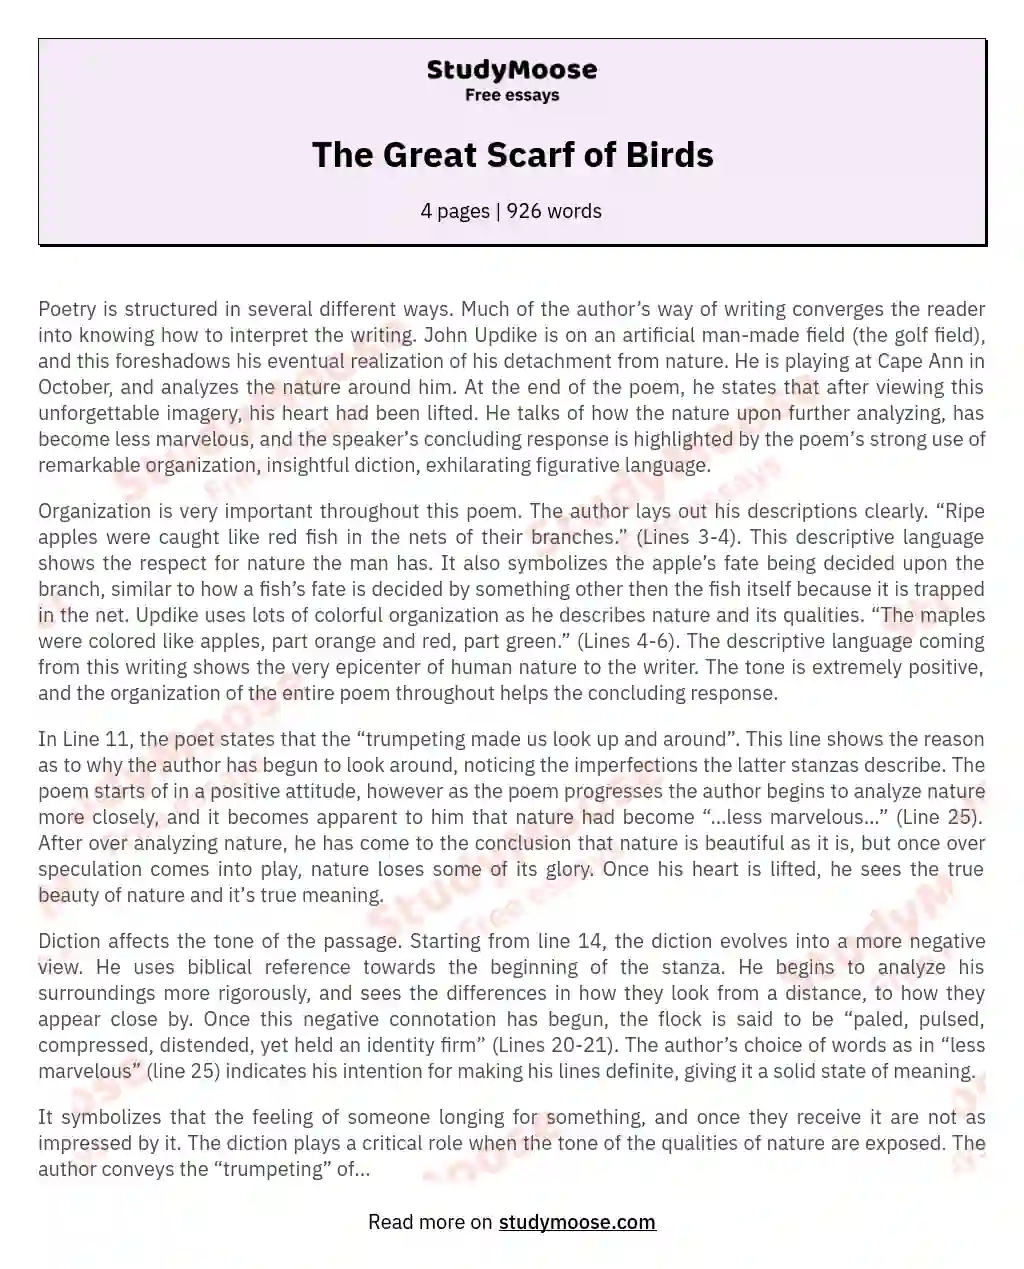 The Great Scarf of Birds essay